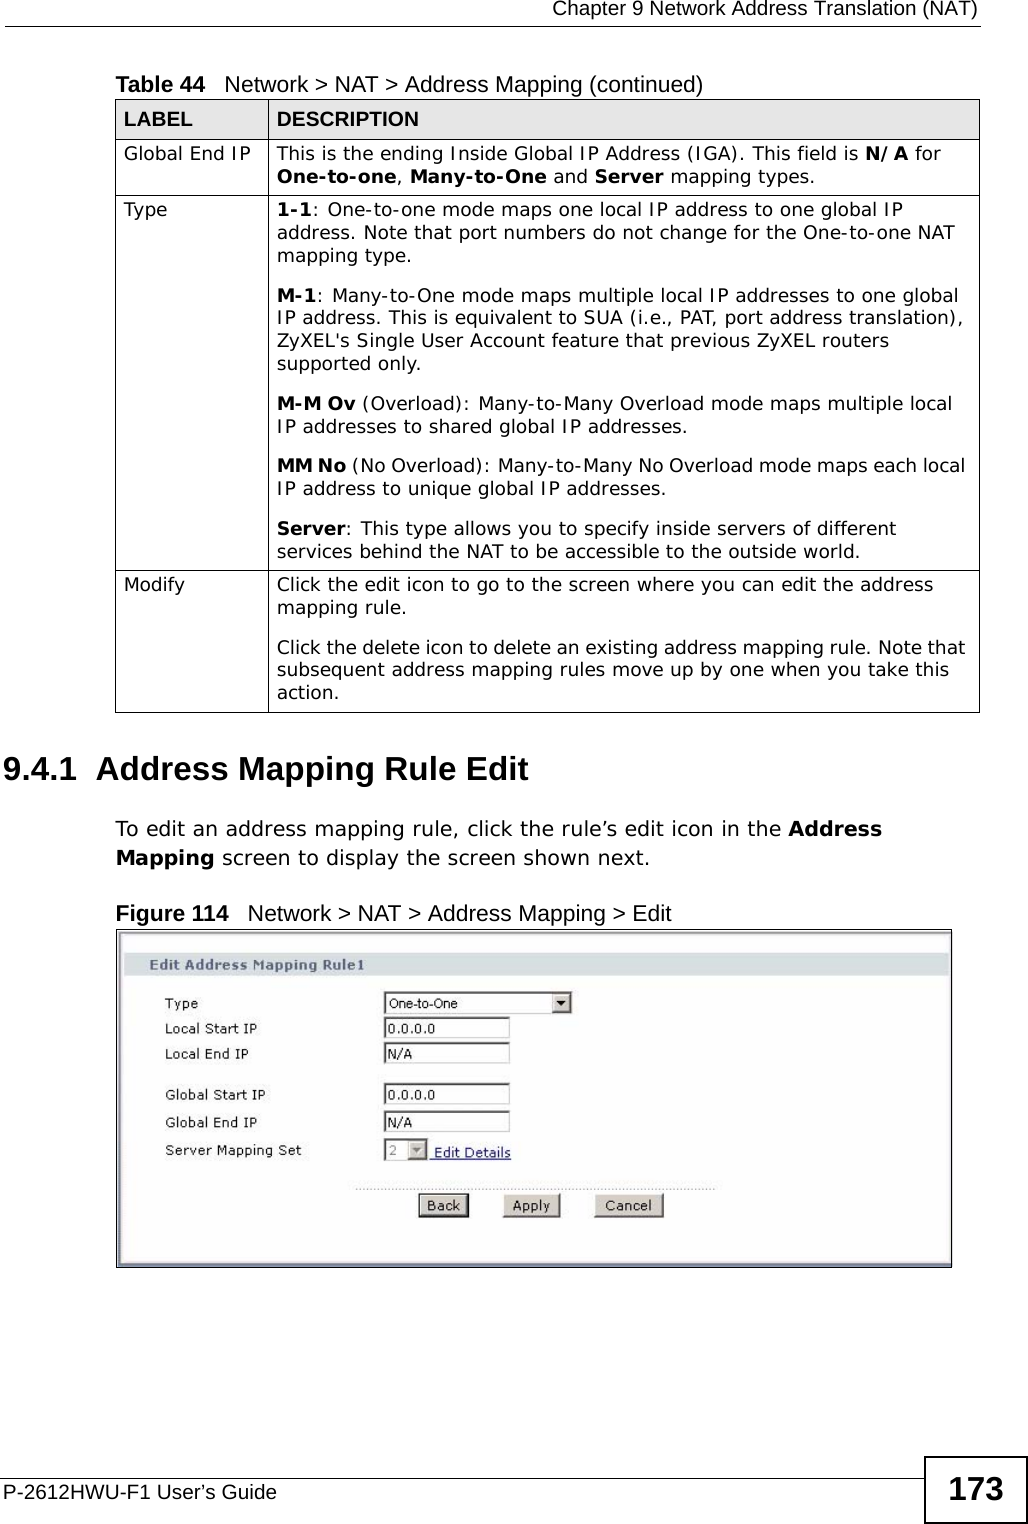  Chapter 9 Network Address Translation (NAT)P-2612HWU-F1 User’s Guide 1739.4.1  Address Mapping Rule Edit To edit an address mapping rule, click the rule’s edit icon in the Address Mapping screen to display the screen shown next.  Figure 114   Network &gt; NAT &gt; Address Mapping &gt; Edit  Global End IP This is the ending Inside Global IP Address (IGA). This field is N/A for One-to-one, Many-to-One and Server mapping types.Type 1-1: One-to-one mode maps one local IP address to one global IP address. Note that port numbers do not change for the One-to-one NAT mapping type. M-1: Many-to-One mode maps multiple local IP addresses to one global IP address. This is equivalent to SUA (i.e., PAT, port address translation), ZyXEL&apos;s Single User Account feature that previous ZyXEL routers supported only. M-M Ov (Overload): Many-to-Many Overload mode maps multiple local IP addresses to shared global IP addresses. MM No (No Overload): Many-to-Many No Overload mode maps each local IP address to unique global IP addresses. Server: This type allows you to specify inside servers of different services behind the NAT to be accessible to the outside world. Modify Click the edit icon to go to the screen where you can edit the address mapping rule.Click the delete icon to delete an existing address mapping rule. Note that subsequent address mapping rules move up by one when you take this action.Table 44   Network &gt; NAT &gt; Address Mapping (continued)LABEL DESCRIPTION